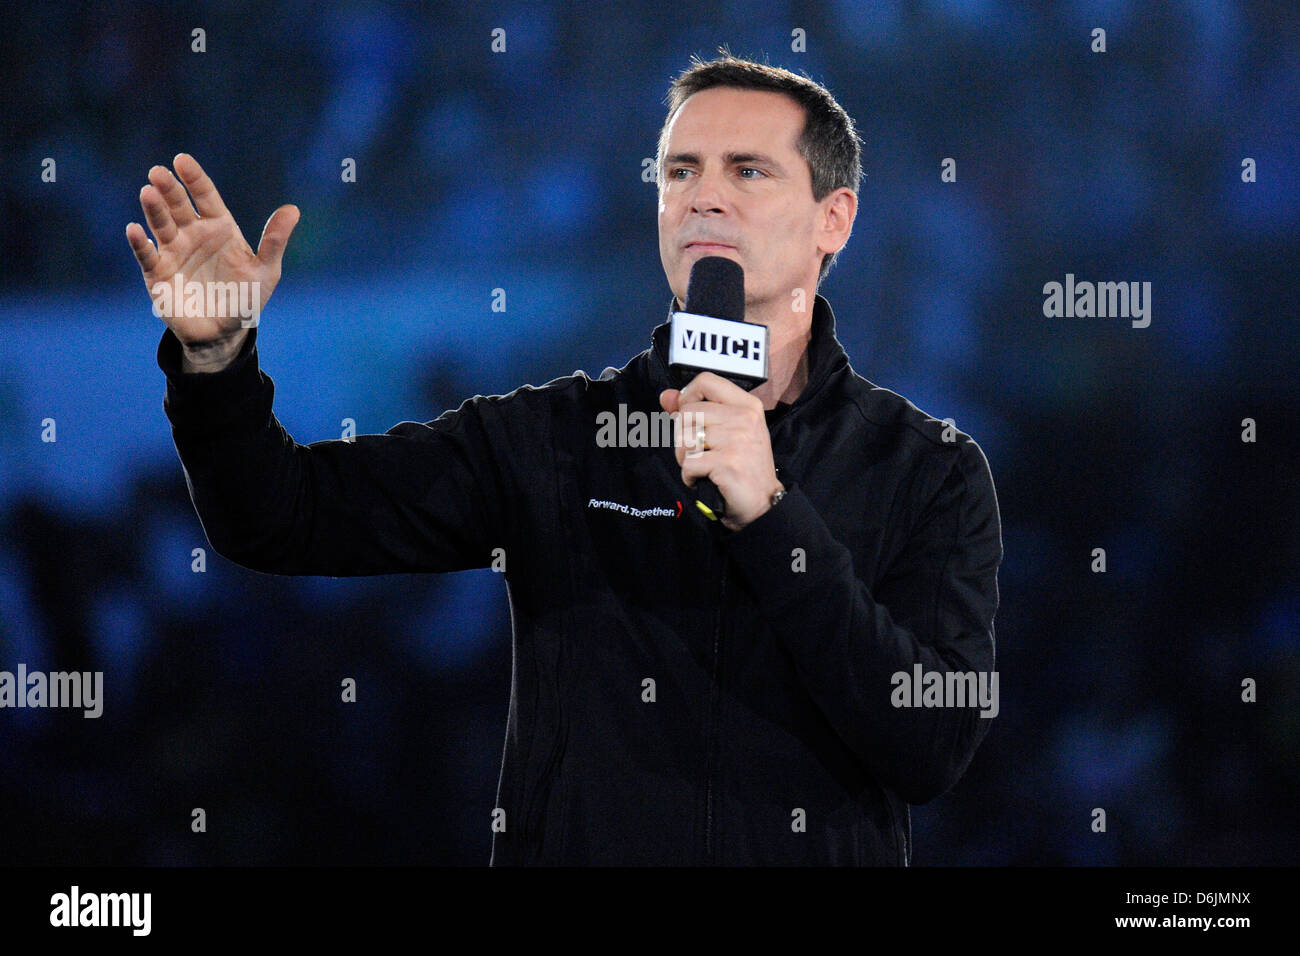 Ontario Premier Dalton McGuinty speaks on stage during 'WE Day' at the Air Canada Centre. Toronto, Canada - 27.09.11 Mandatory Stock Photo